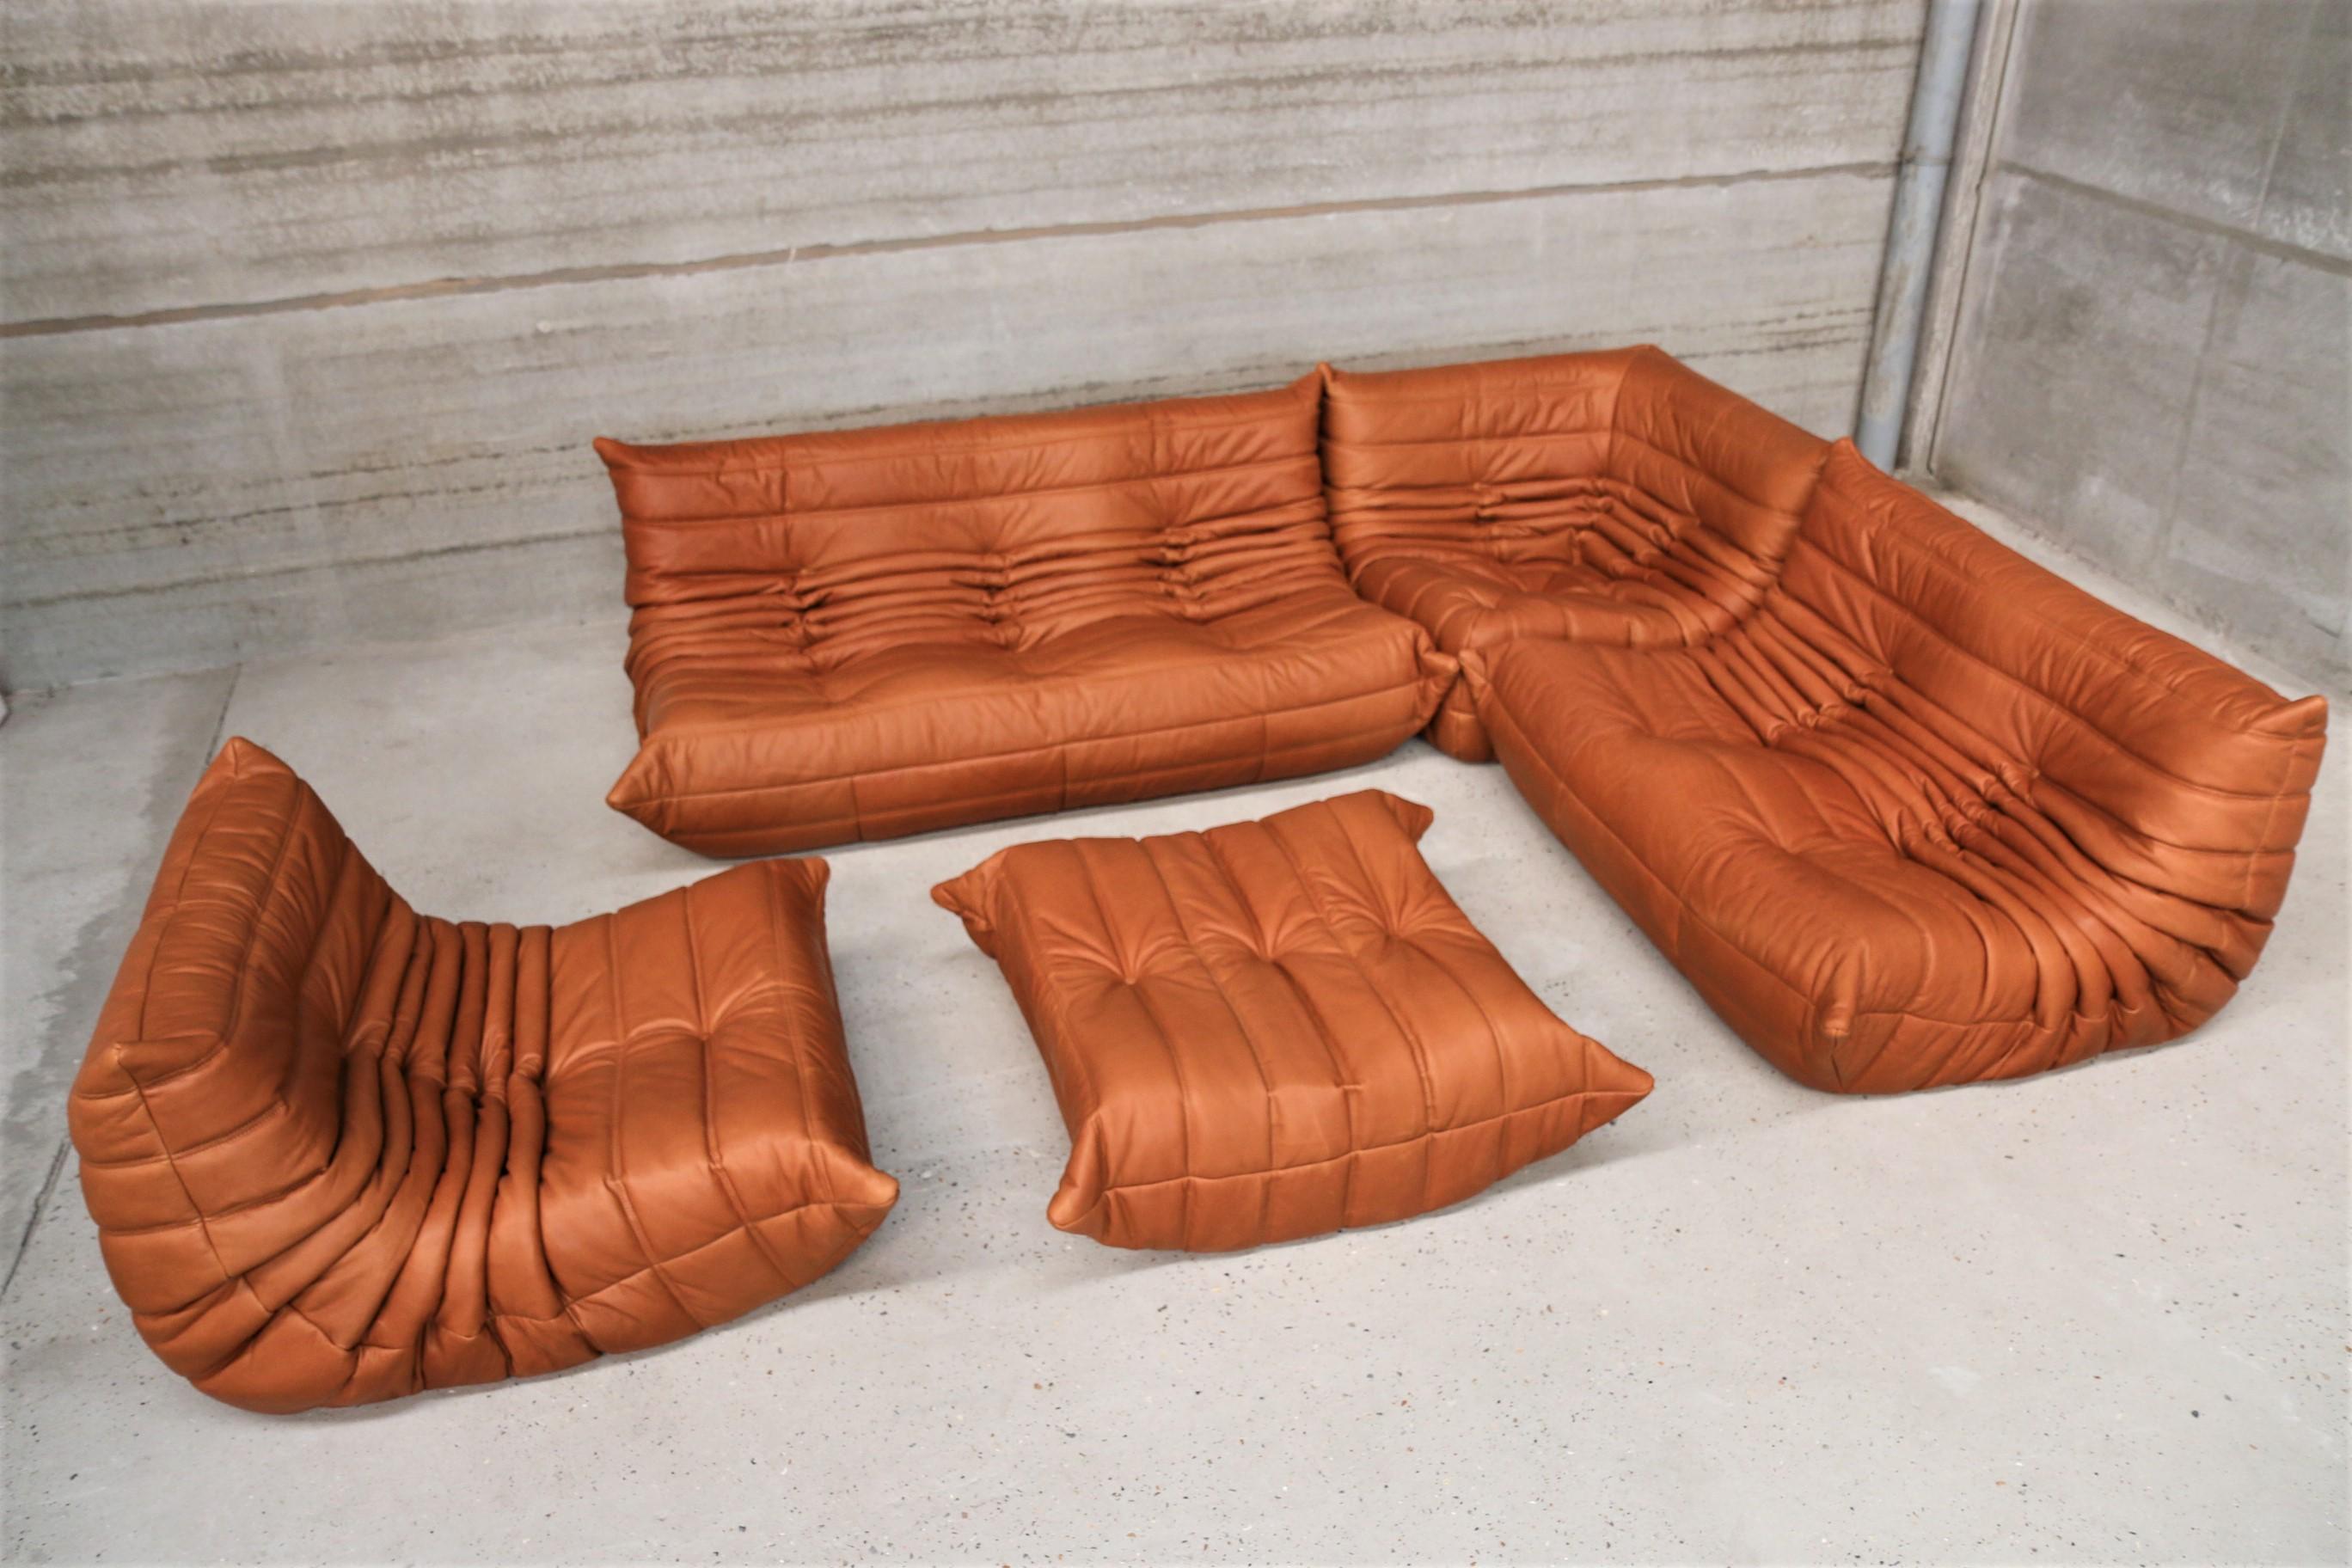 Iconic French vintage sofa lounge set, beautifully reupholstered with our signature full grain cognac leather.
Original genuine vintage 